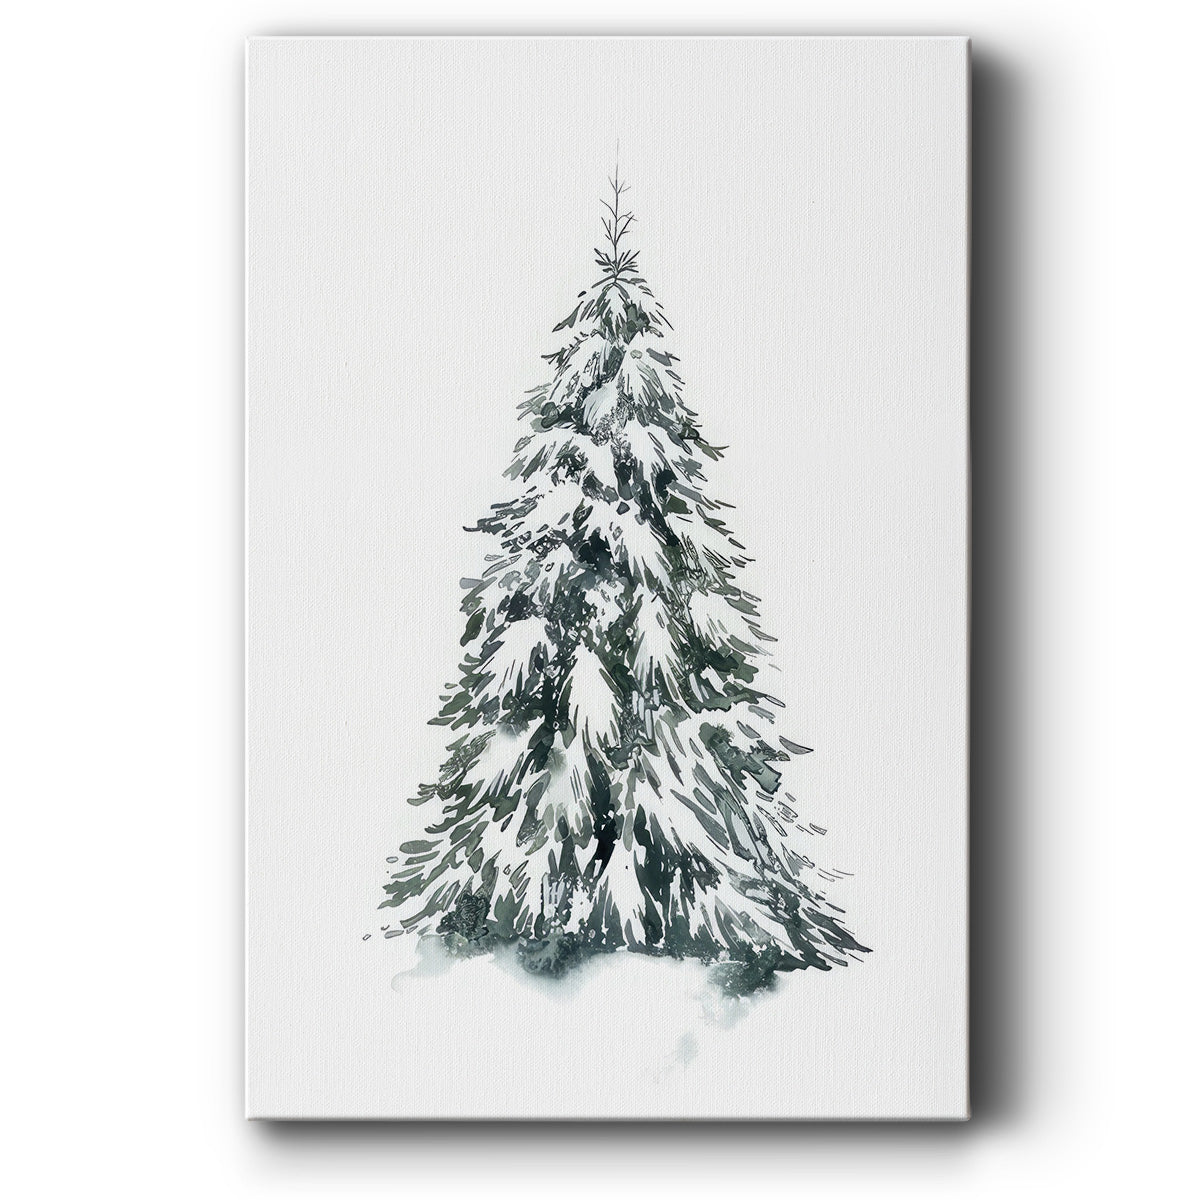 Blue Spruce II - Gallery Wrapped Canvas